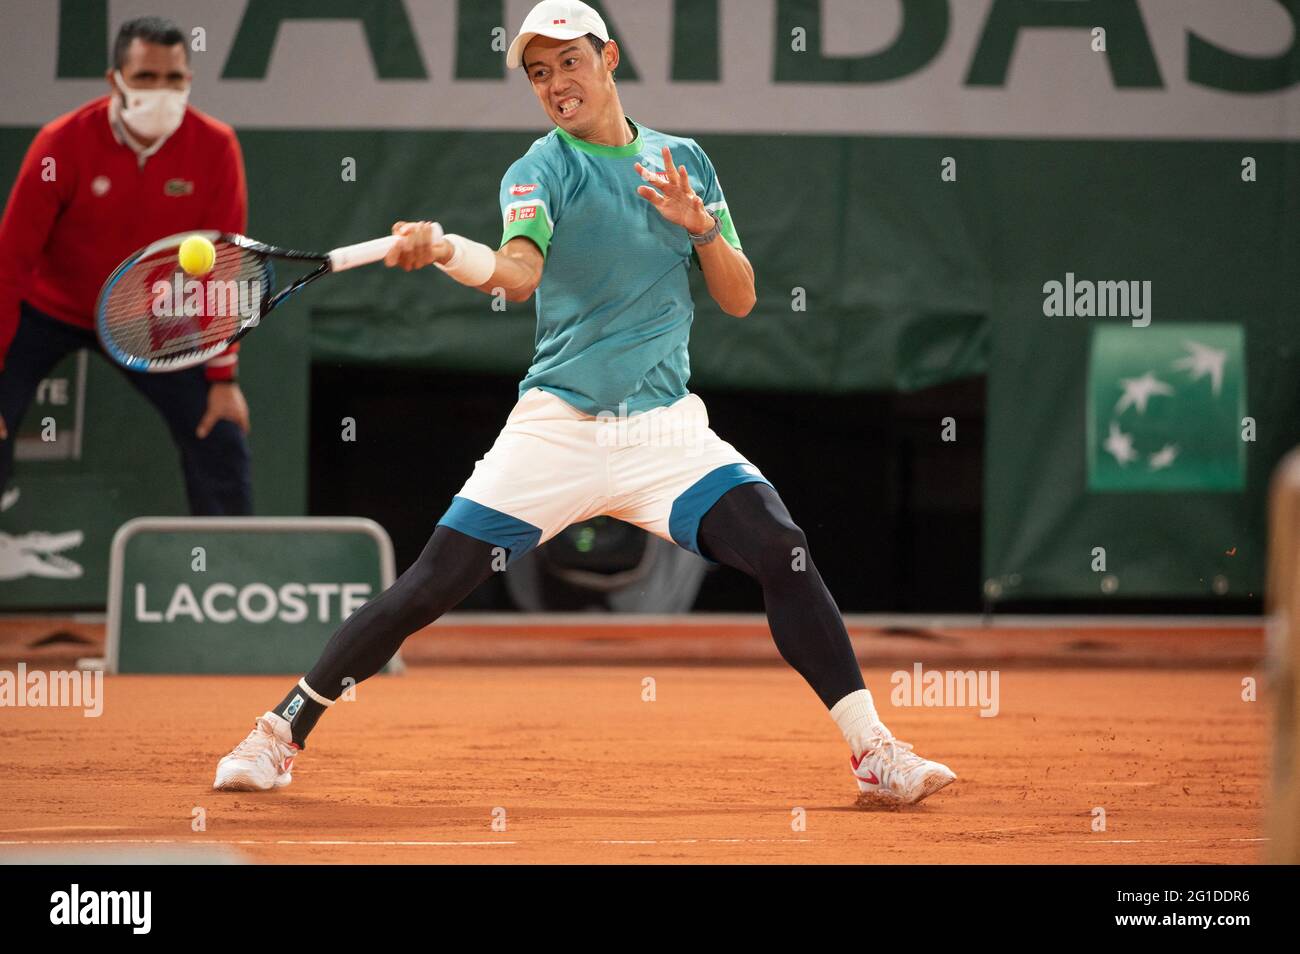 Paris, France. 06th June, 2021. Kei Nishikori during the 2021 French Open  at Roland Garros on